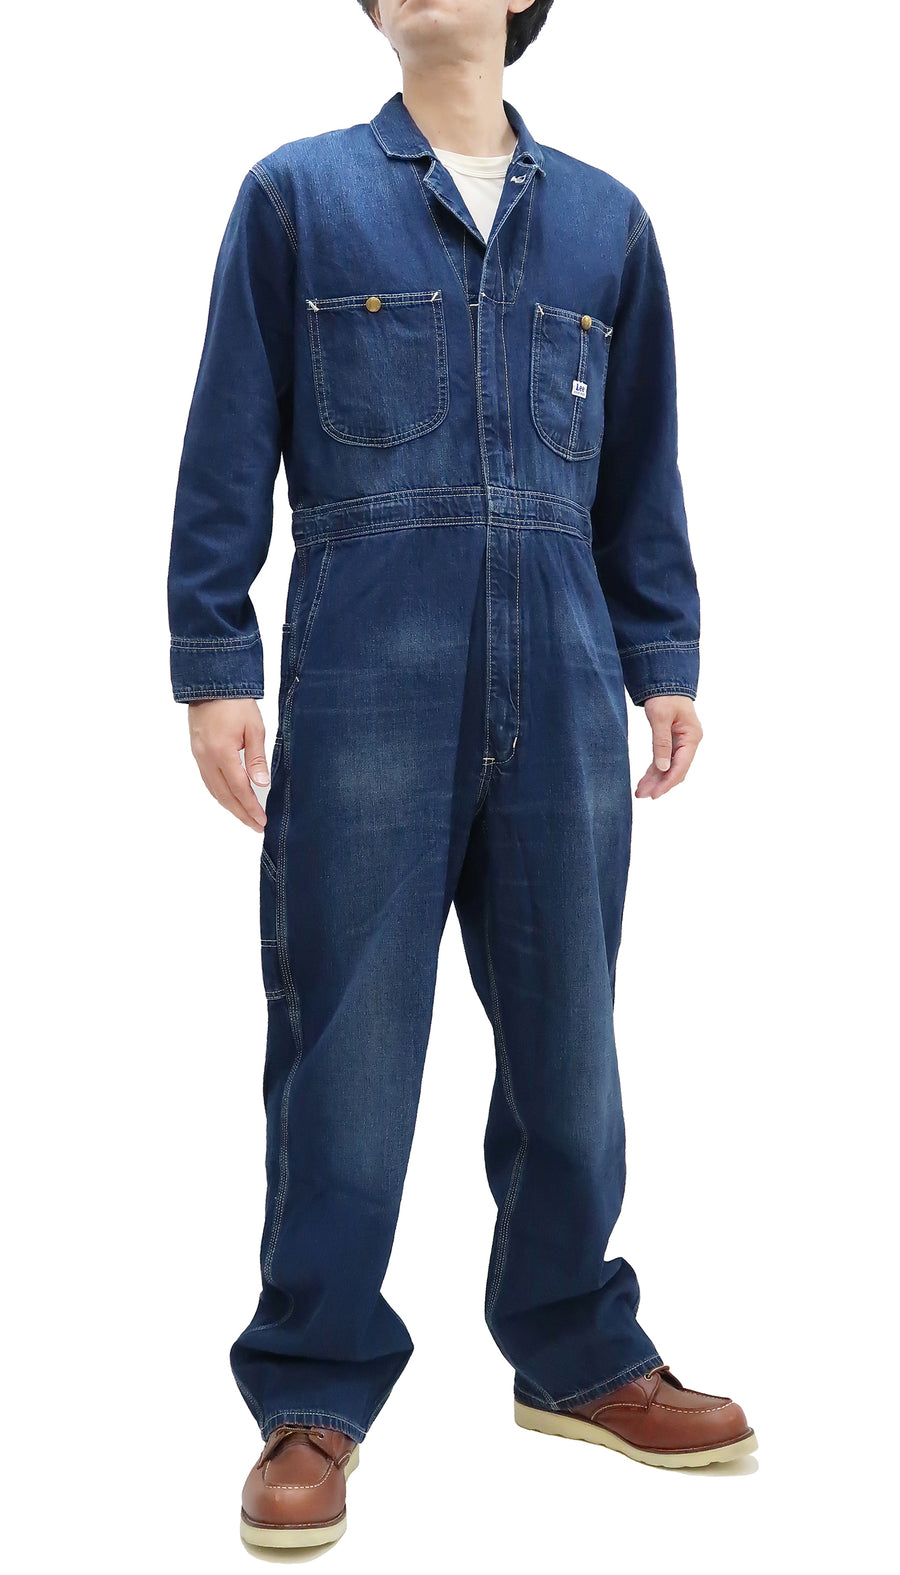 Lee Coverall Men's Reproduction of Union-All Long Sleeve Unlined 